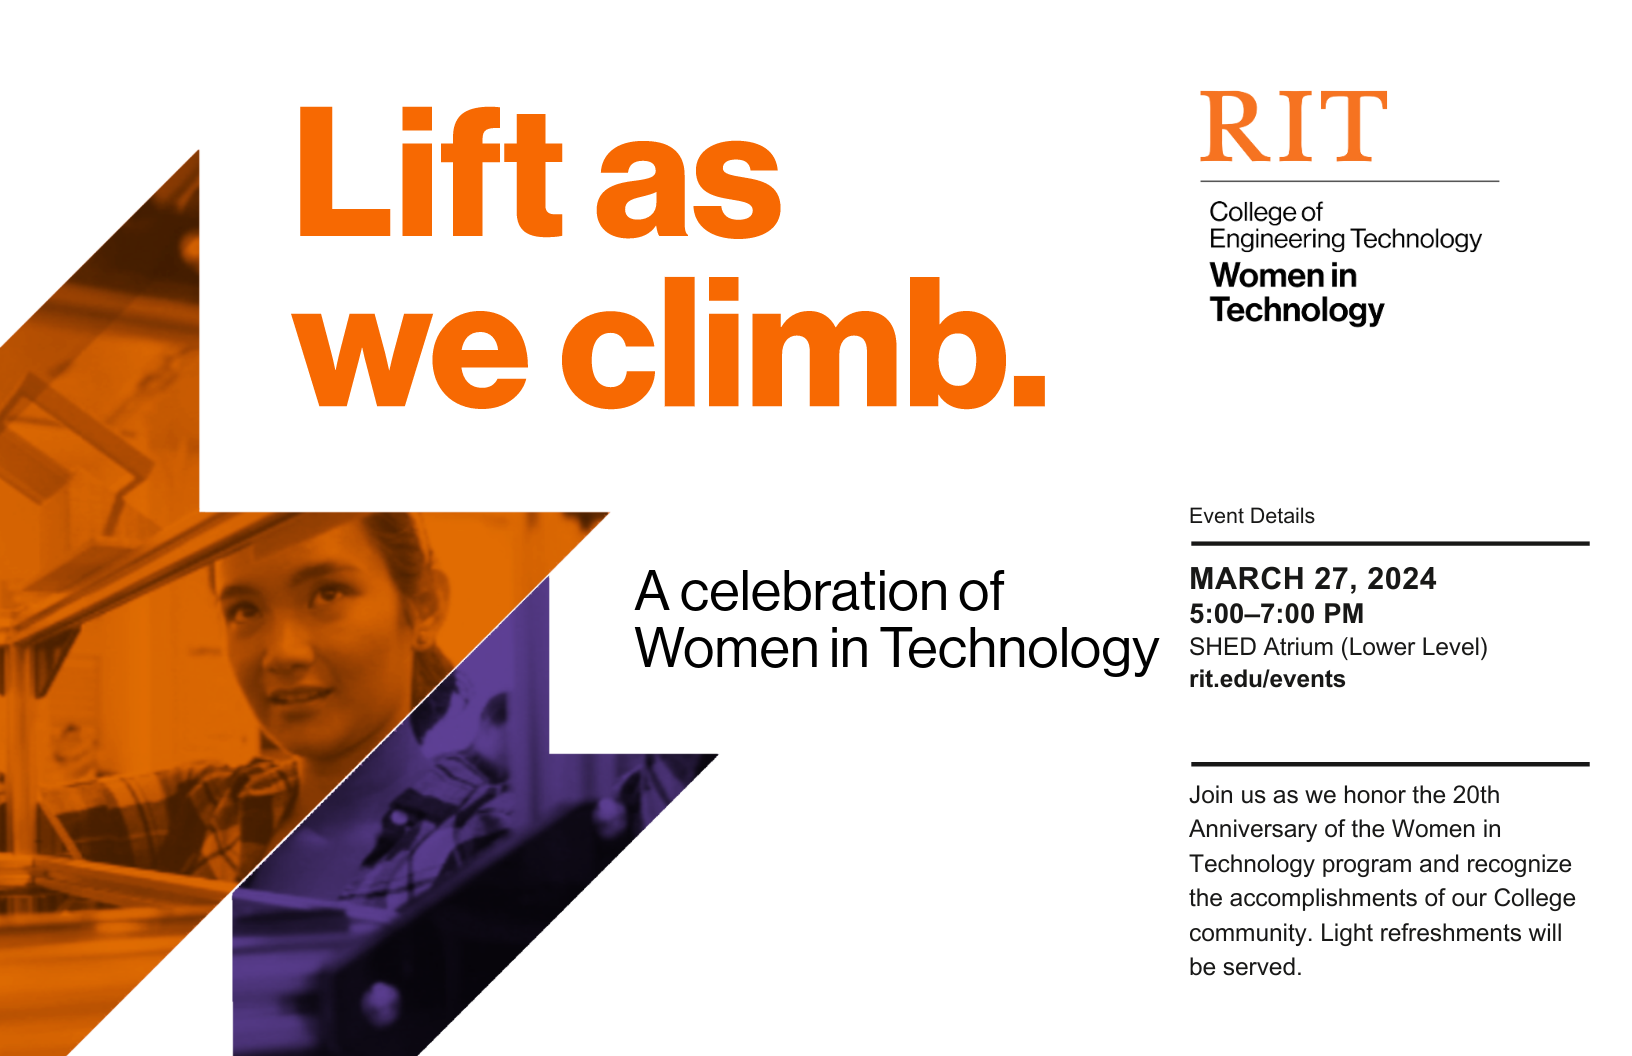 Lift as we climb event promotion with woman student working on a machine in a graphic with text about the event